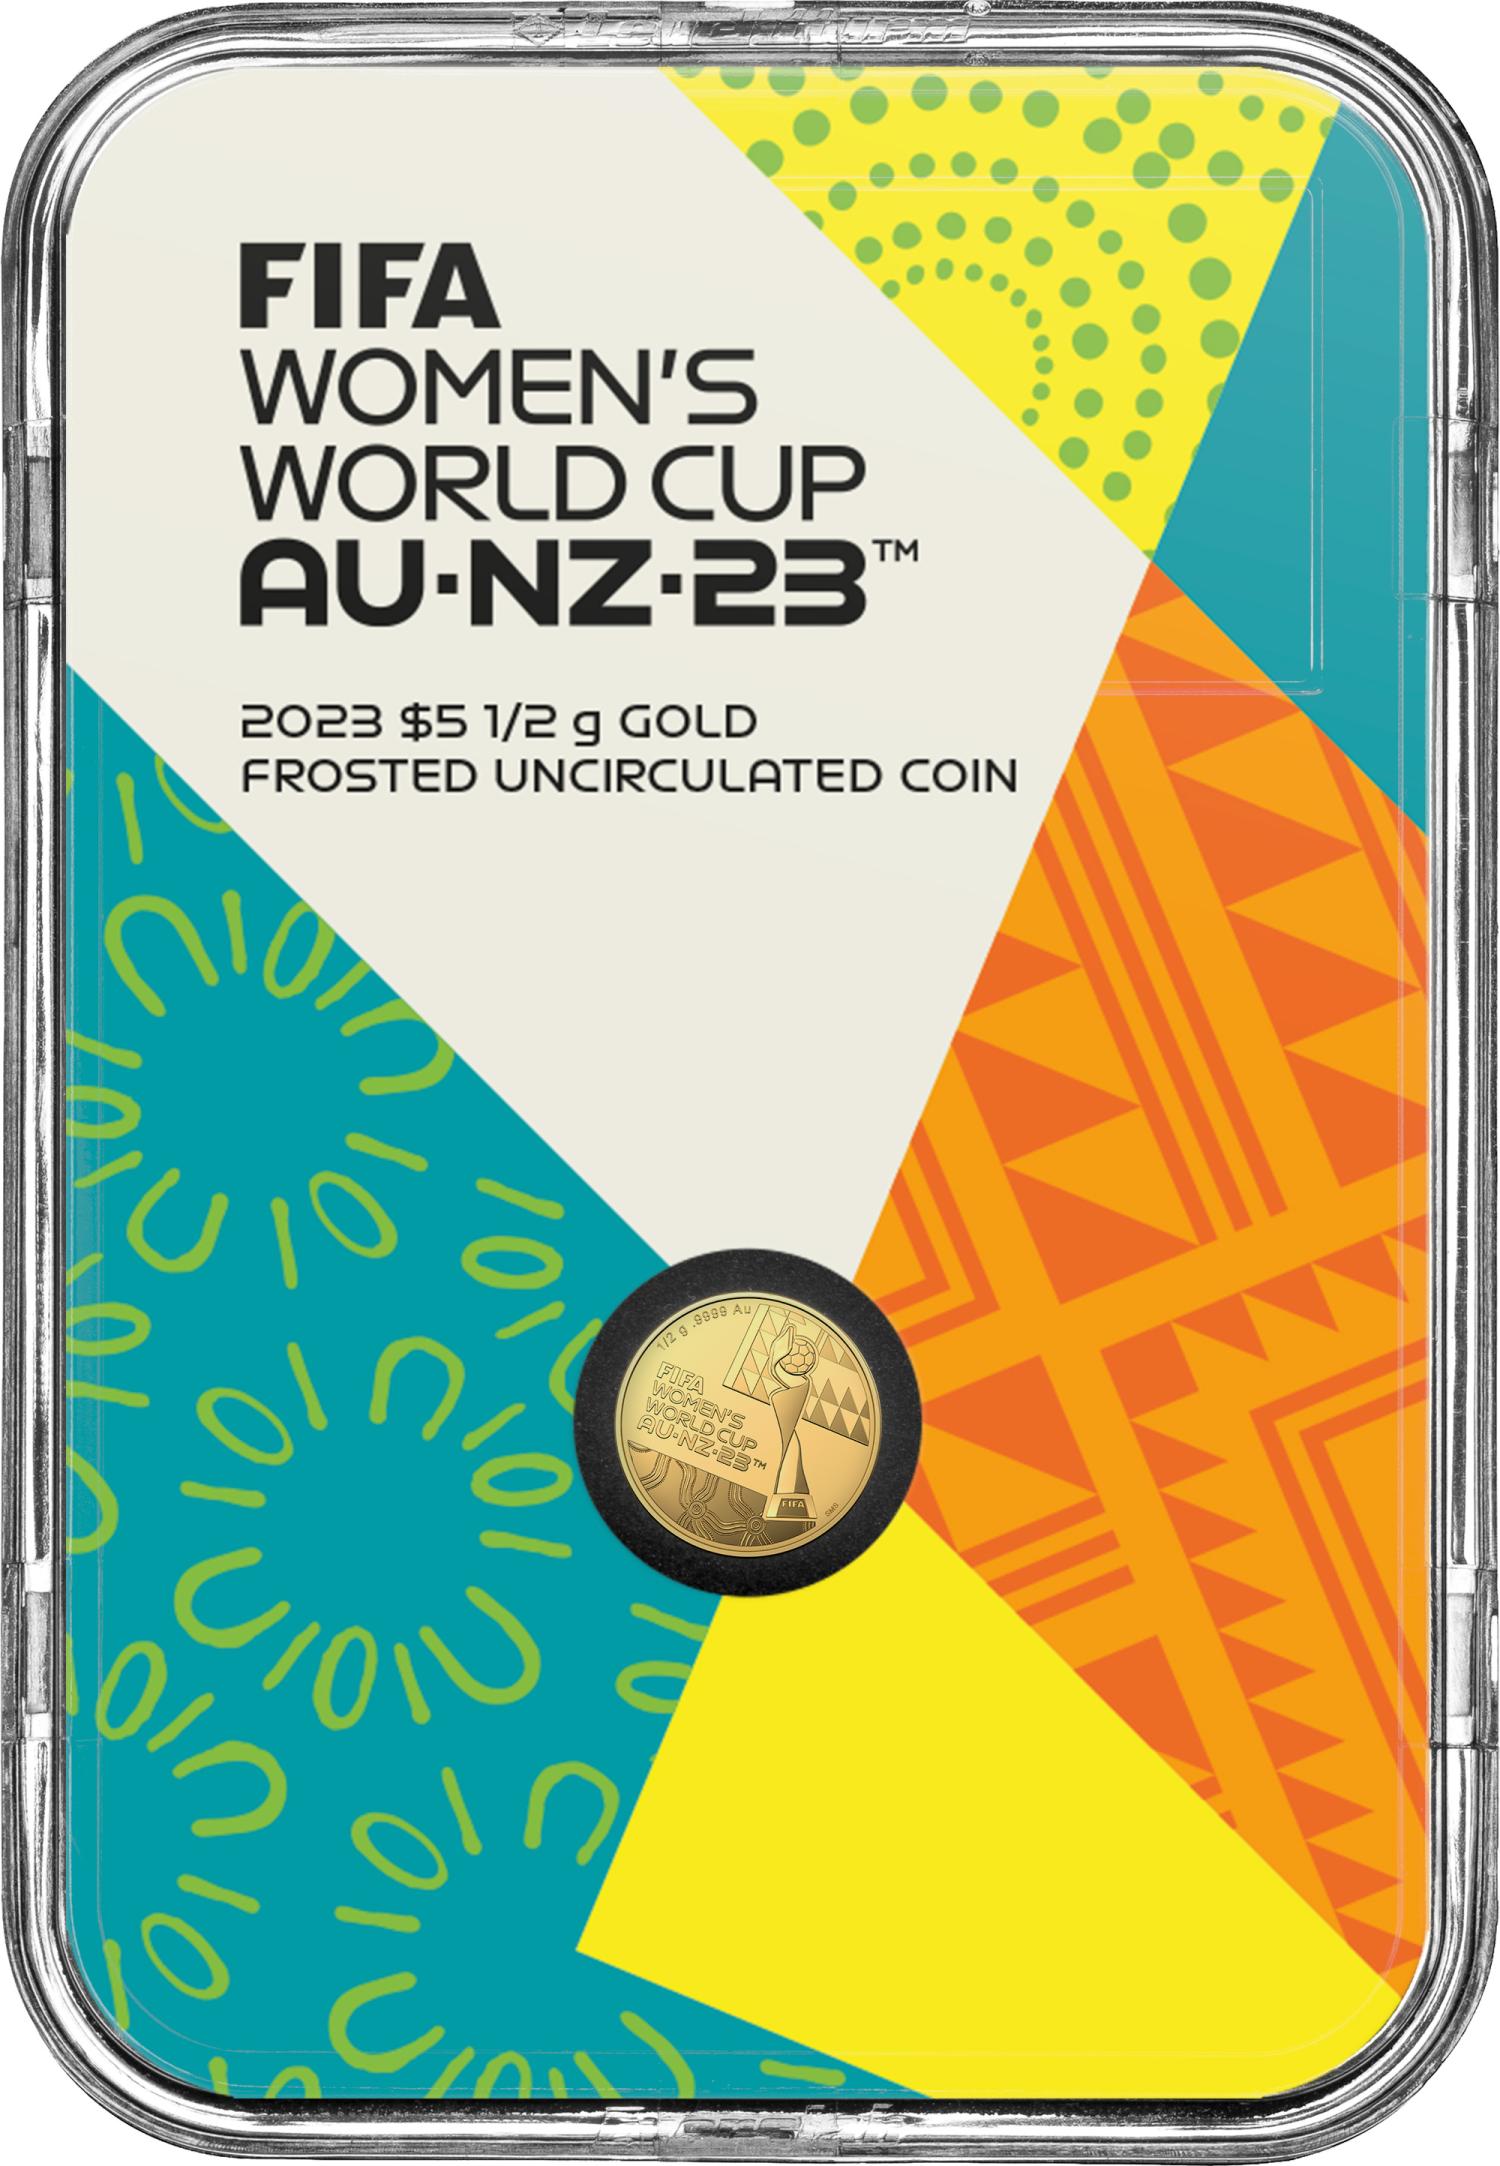 Thumbnail for 2023 $5 FIFA Women's World Cup Aust & NZ 2023 ™ Half Gram Gold Frosted UNC Coin in Case 